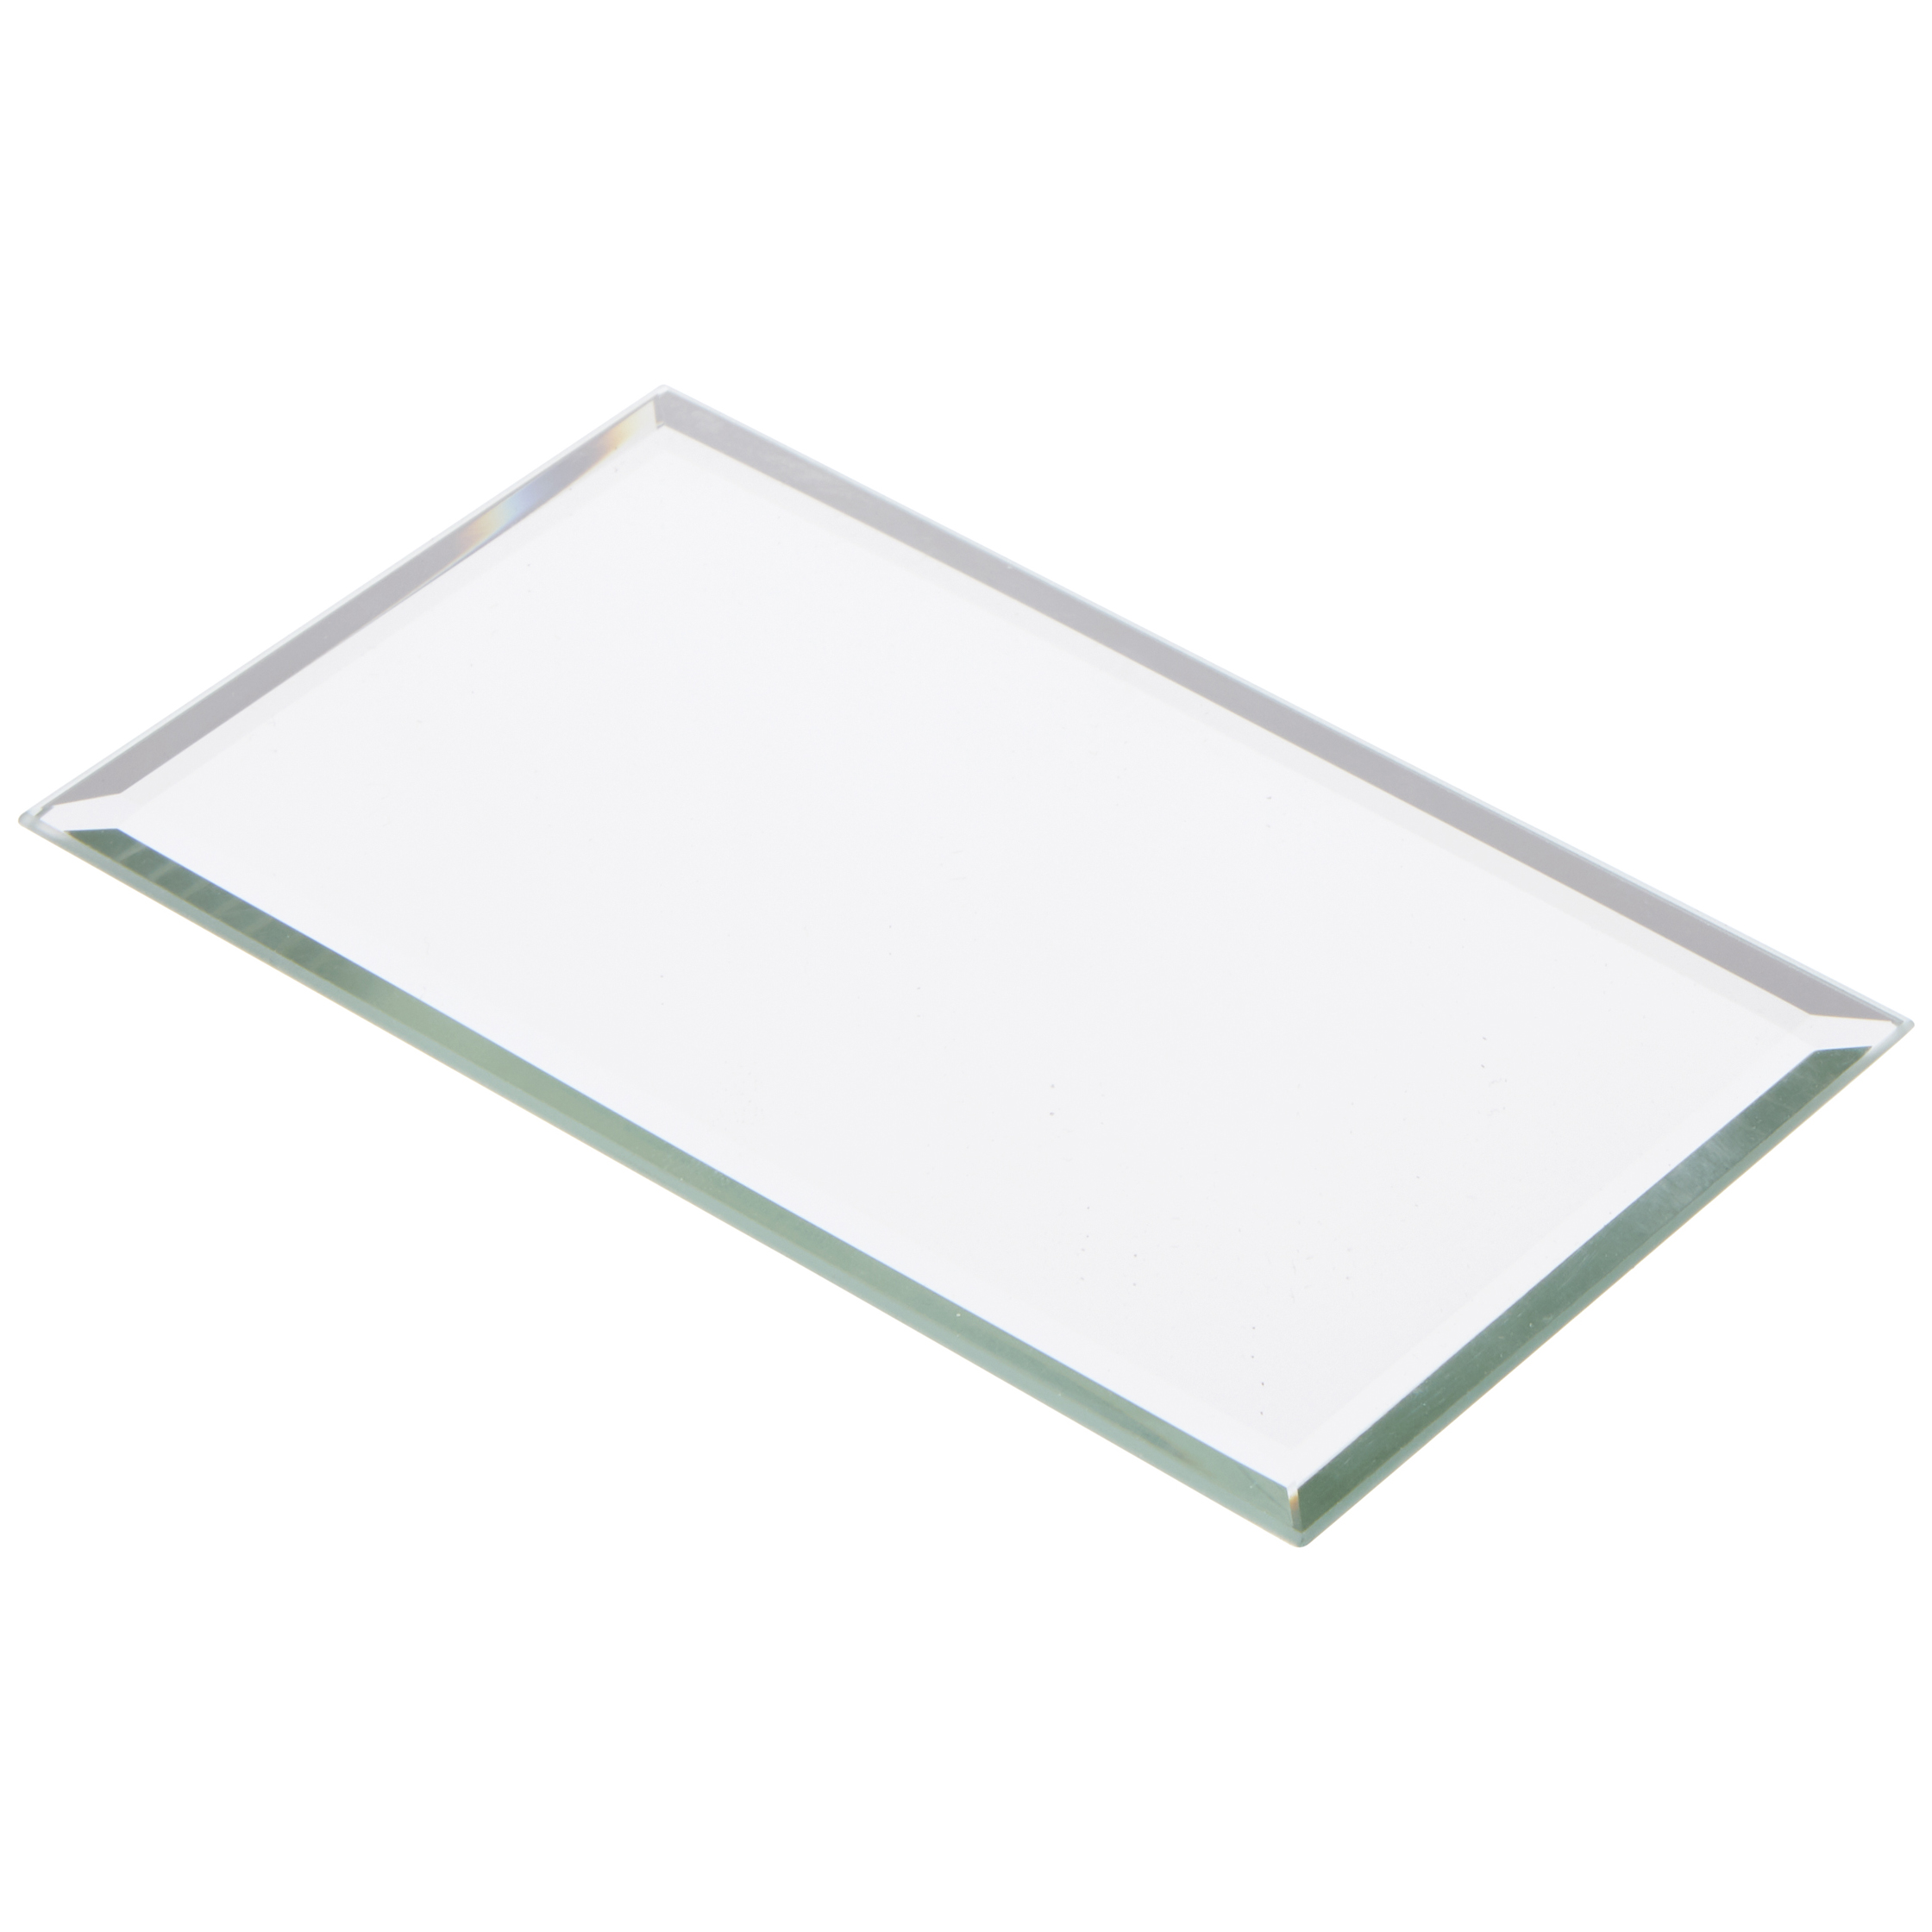 Plymor Octagon 3mm Beveled Glass Mirror Pack of 3 3 inch x 3 inch 